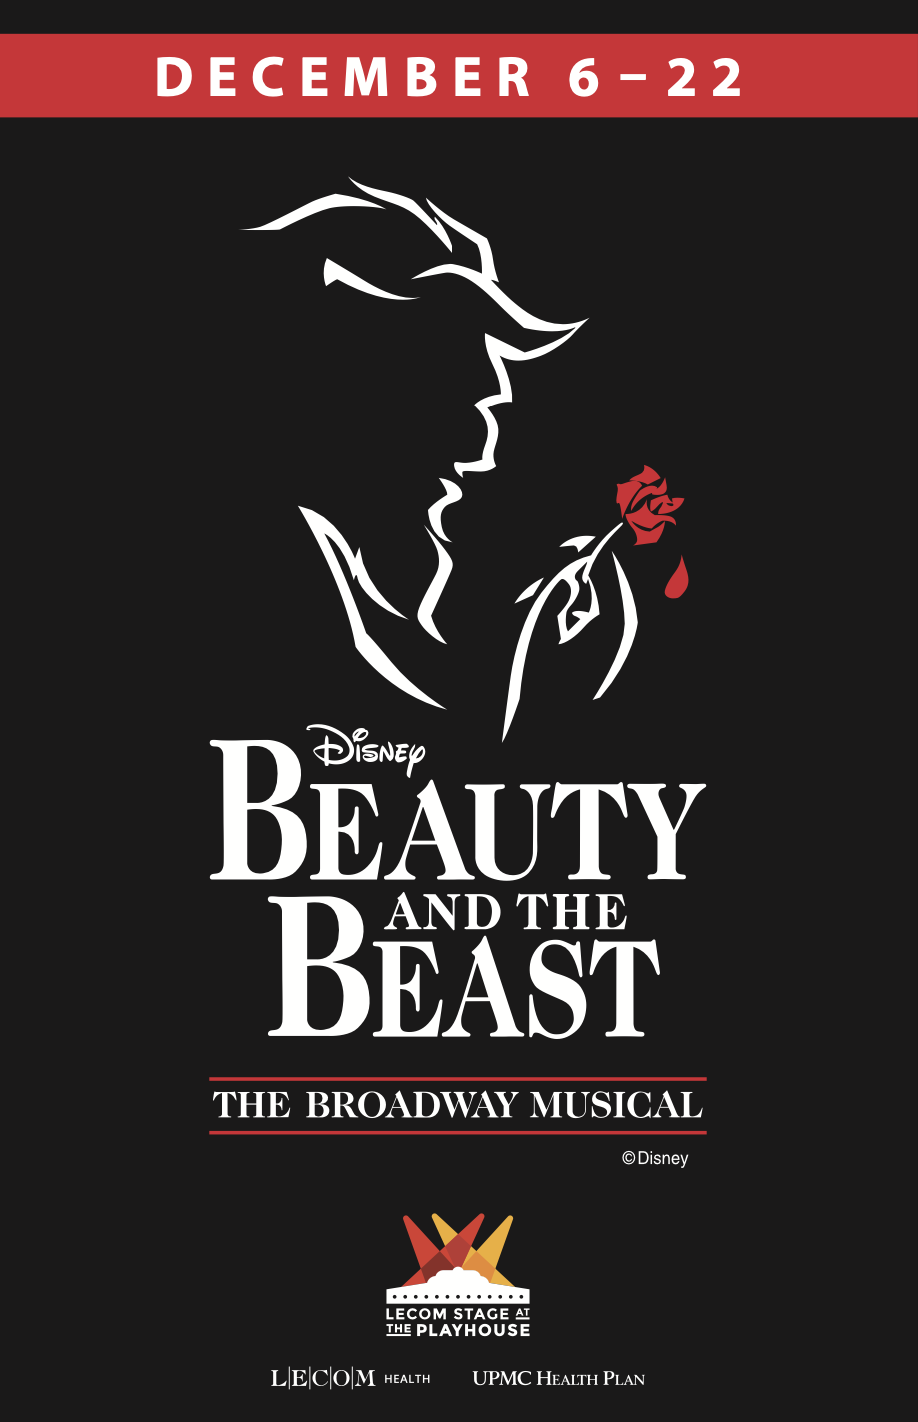 The Playhouse presents: Beauty and The Beast